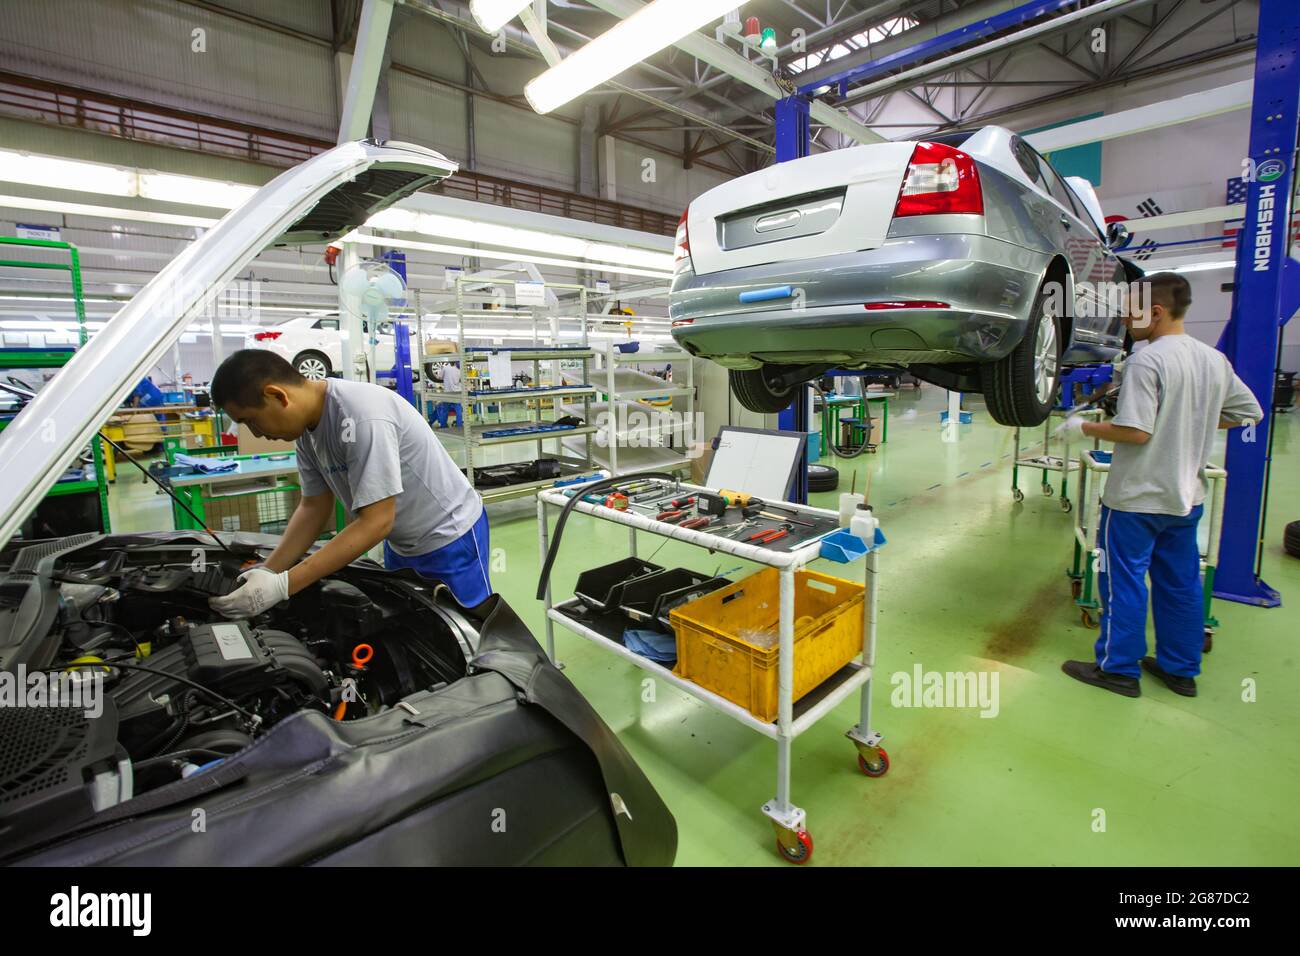 Ust'-Kamenogorsk,Kazakhstan,May 31,2012: Asia-Auto company auto-building plant. KIA cars assembling. Worker (left) install engine parts. Stock Photo